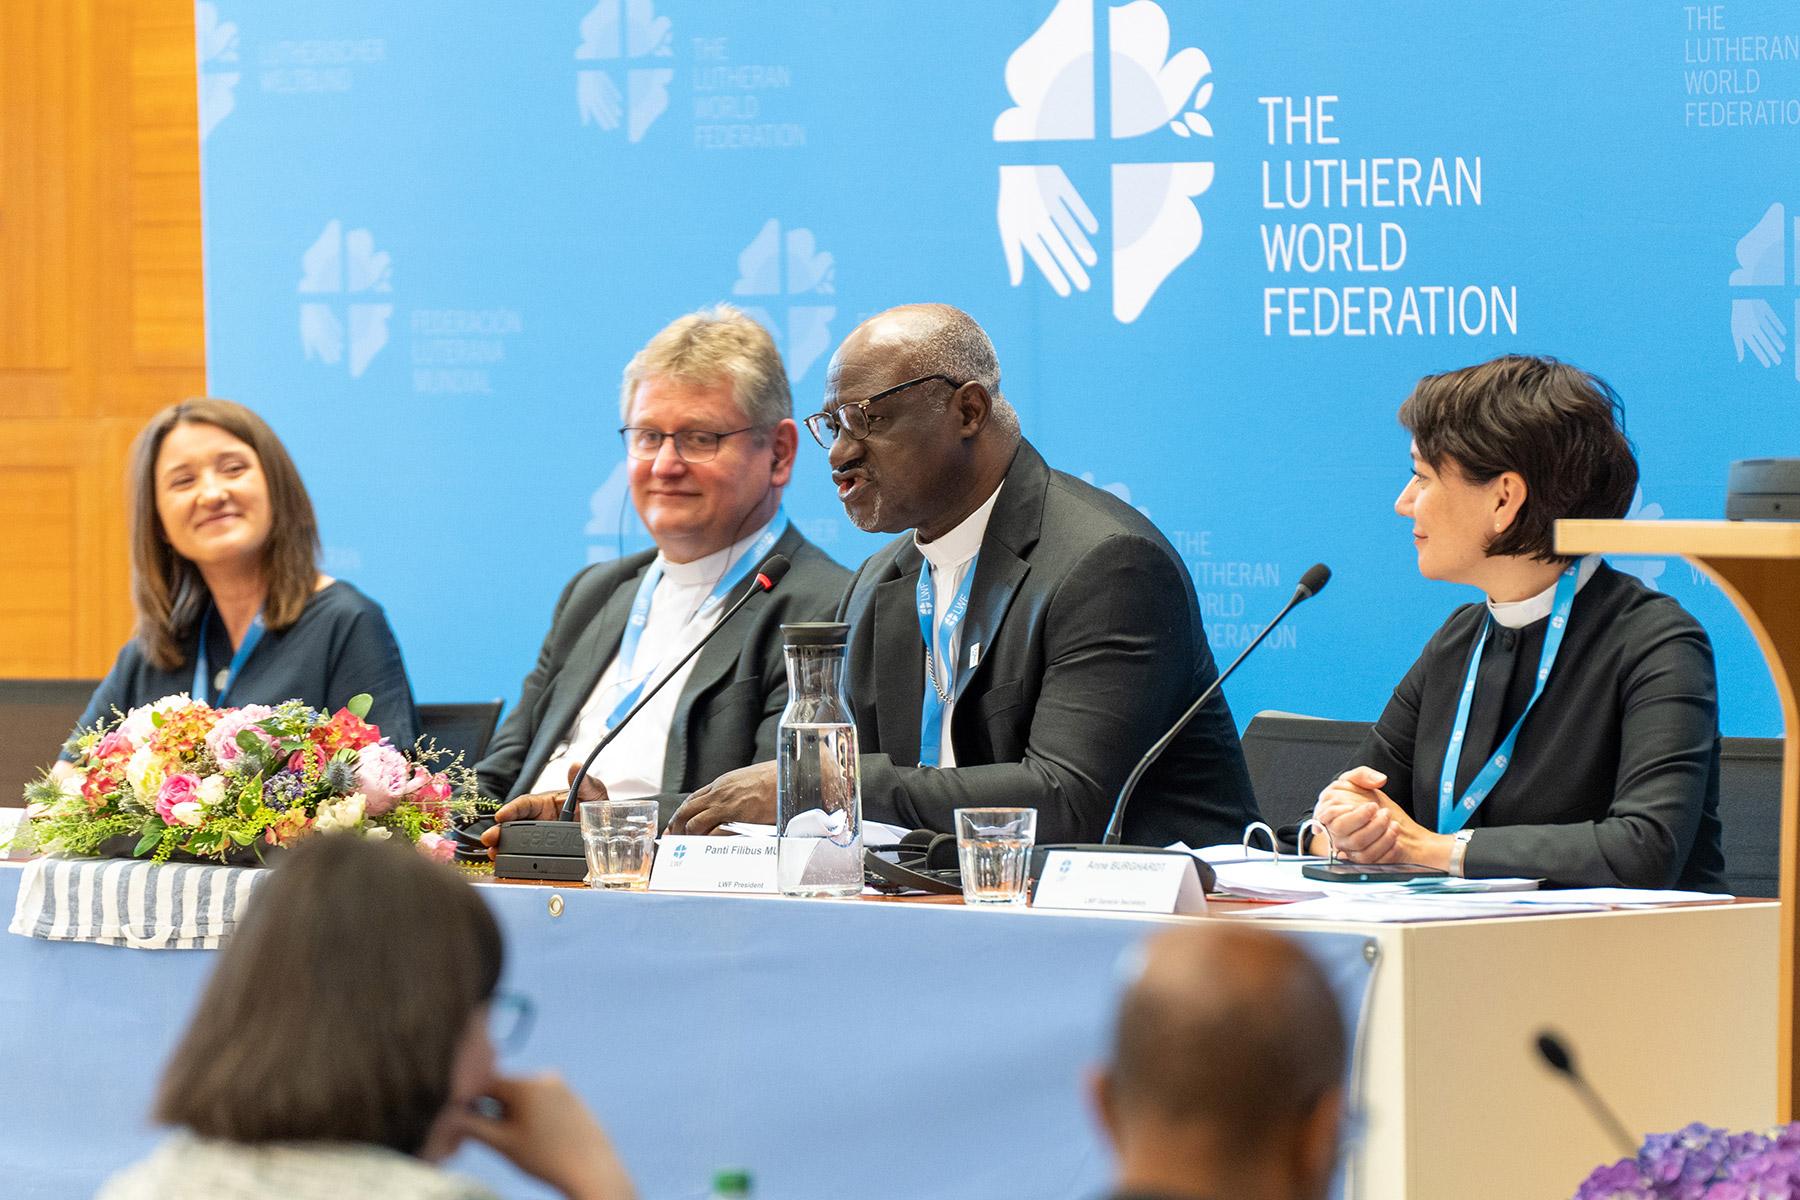 Looking forward to the Thirteenth Assembly: (from left) Anna Wrzesińska, Chairperson of the Local Assembly Planning Committee, Jerzy Samiec, Presiding Bishop of the Evangelical Church of the Augsburg Confession in Poland, LWF President Panti Filibus Musa and LWF General Secretary Anne Burghardt. Photo: LWF/S. Gallay